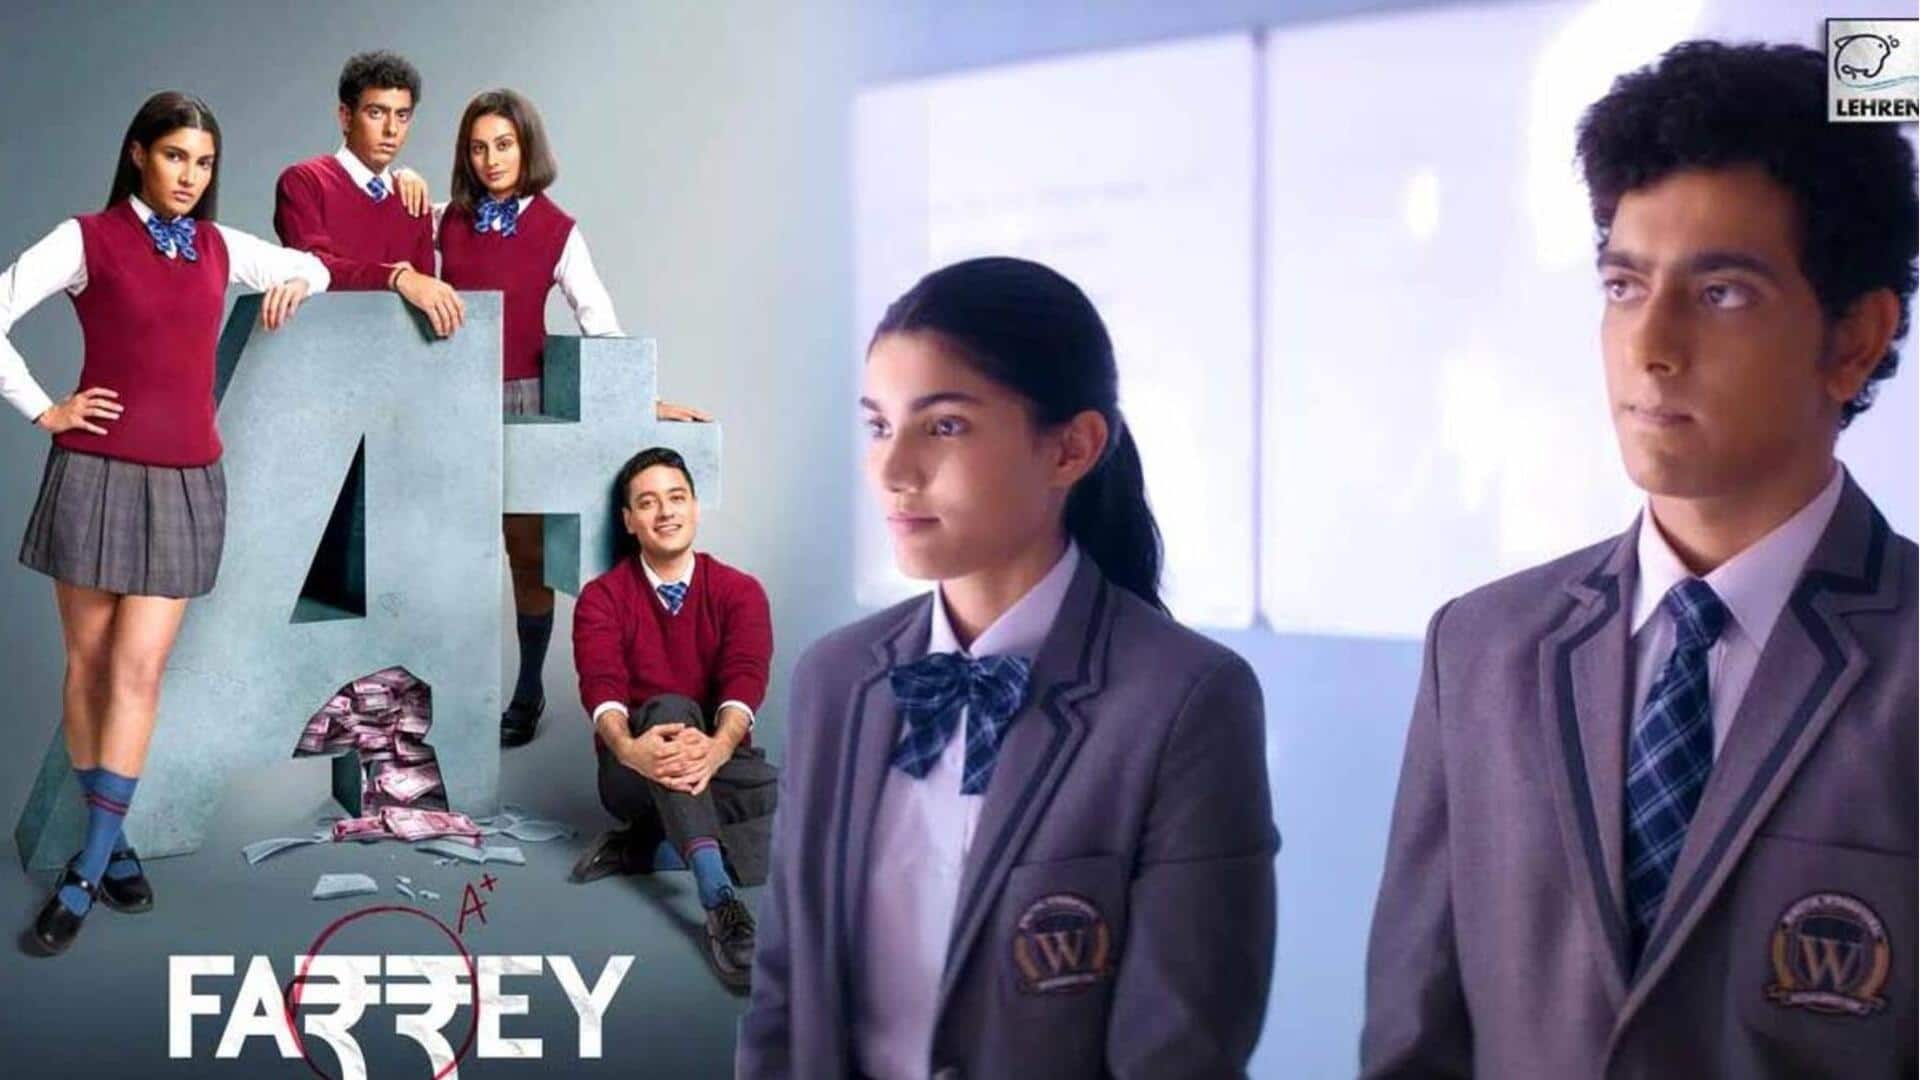 Box office: 'Farrey' fails to impress; collections indicate struggle